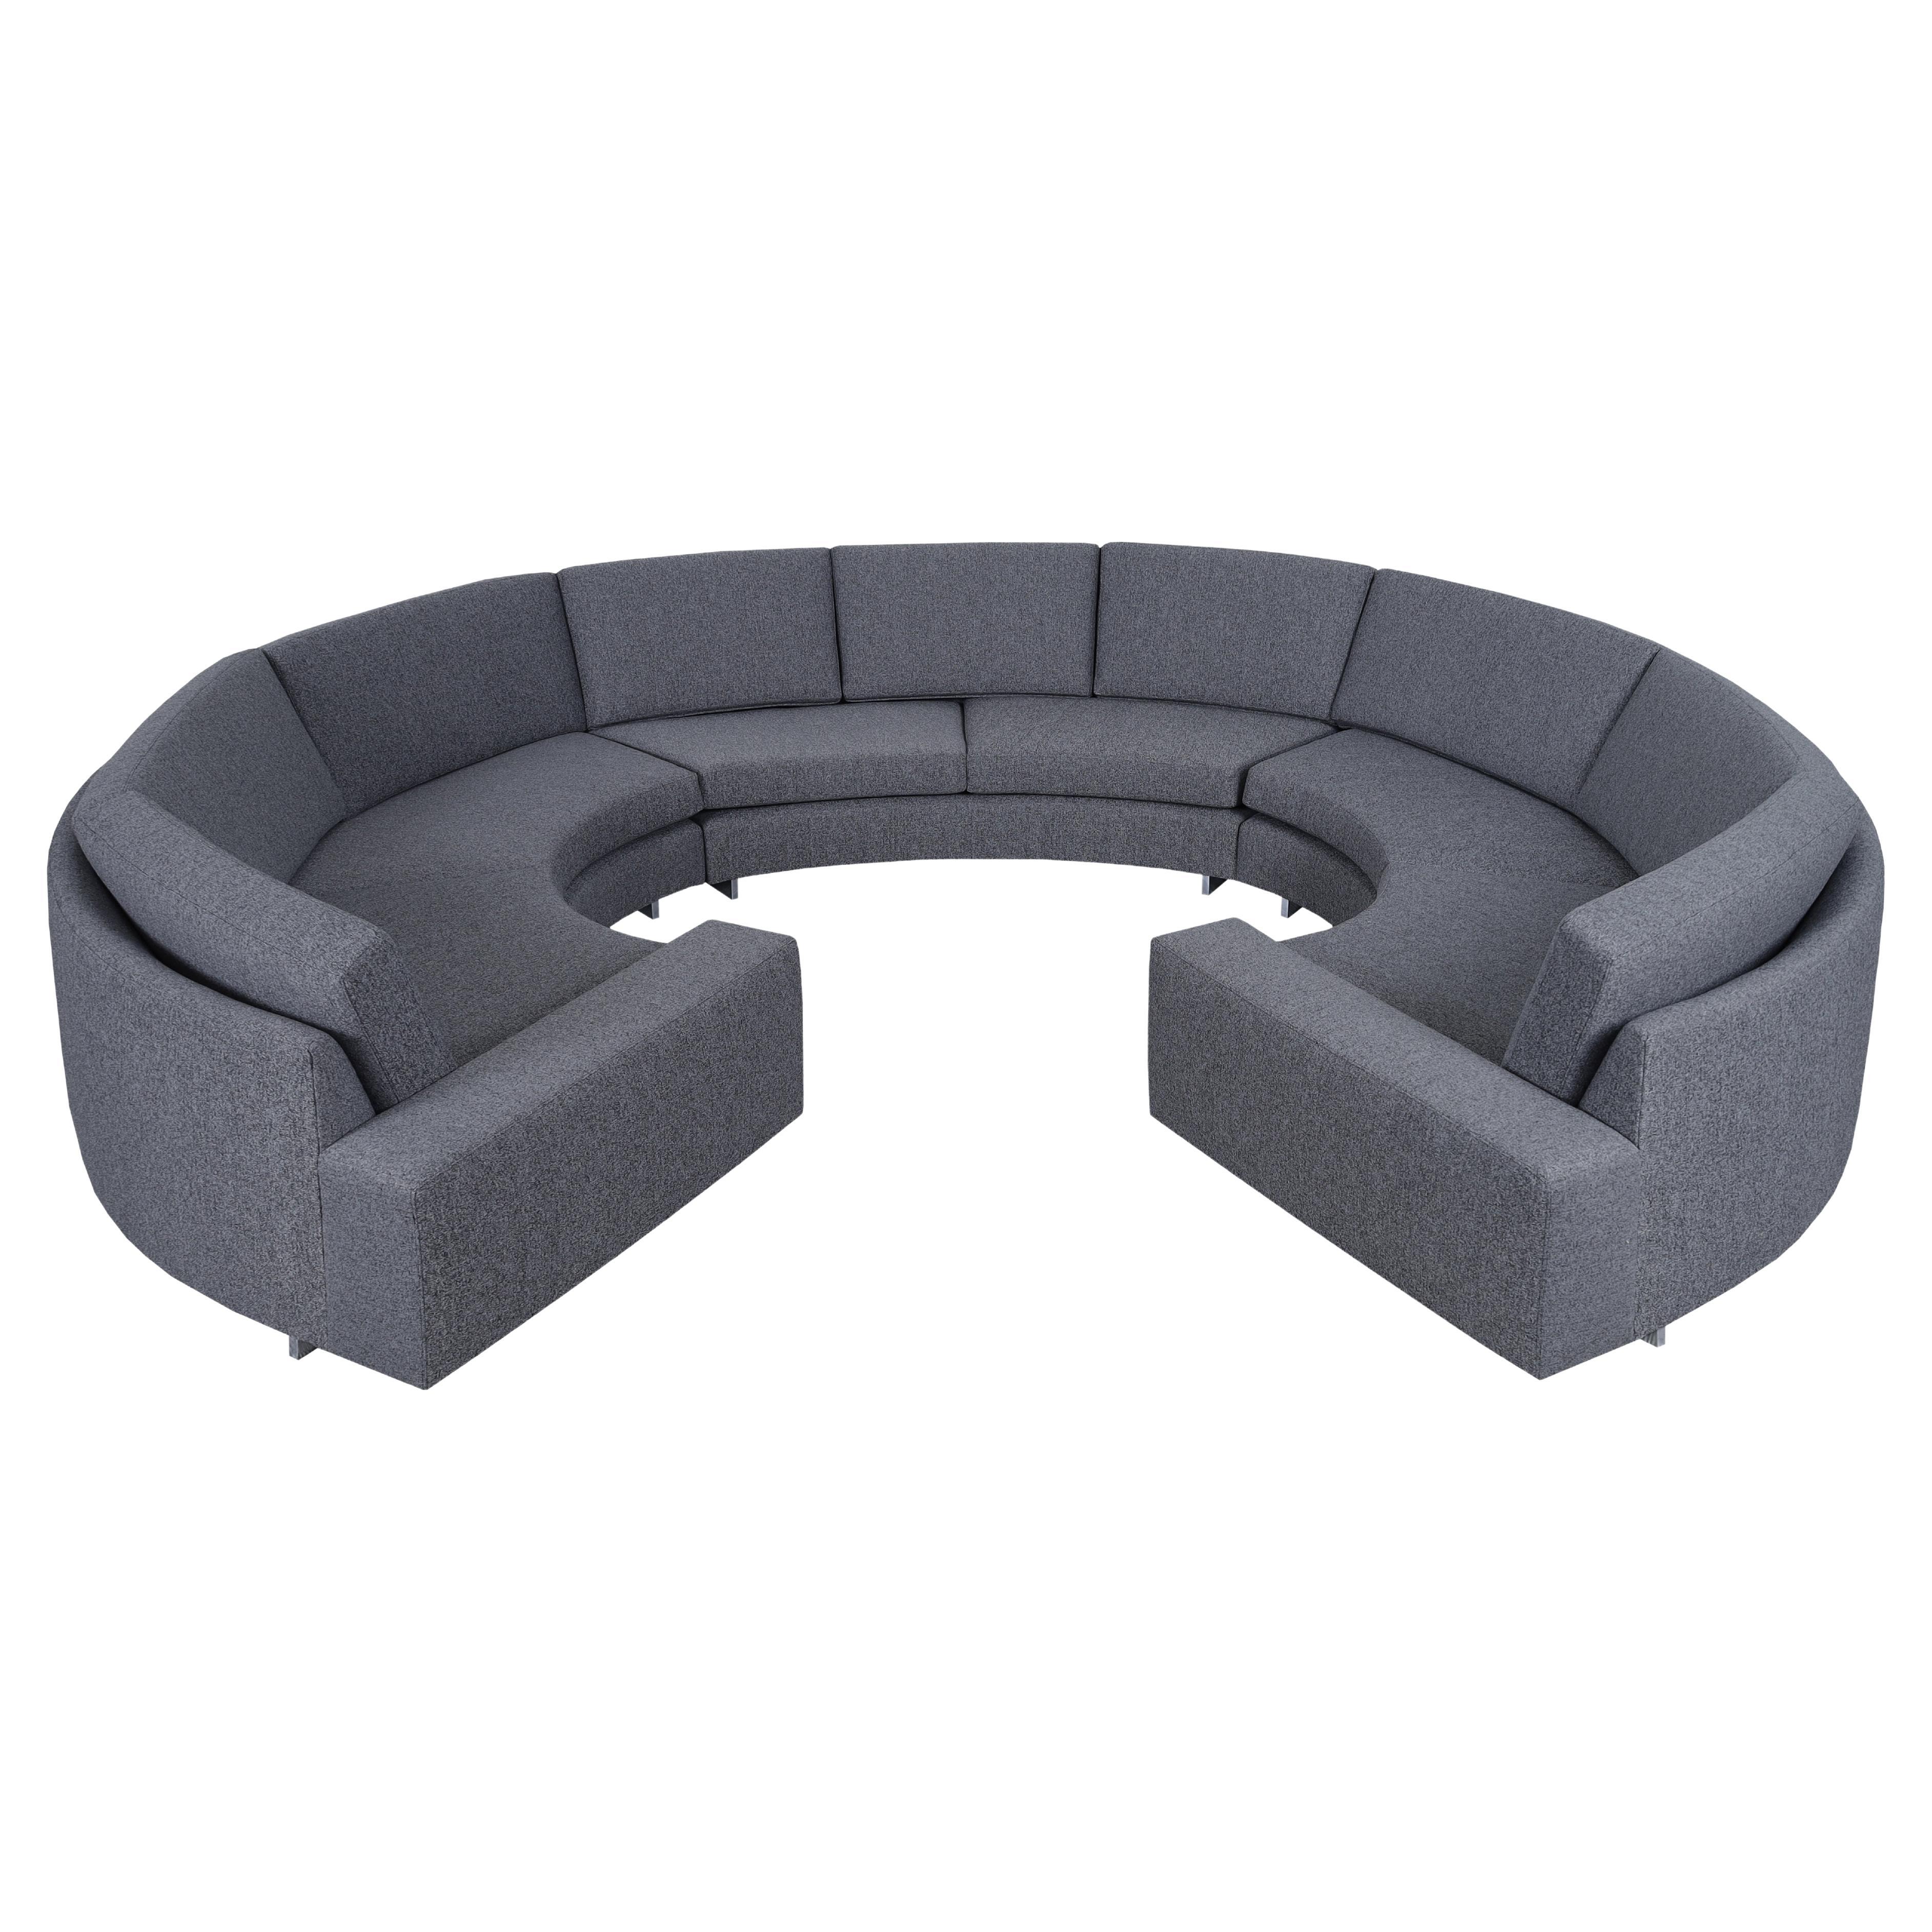 Vintage Chrome Circular Sectional Sofa in the style of Milo Baughman